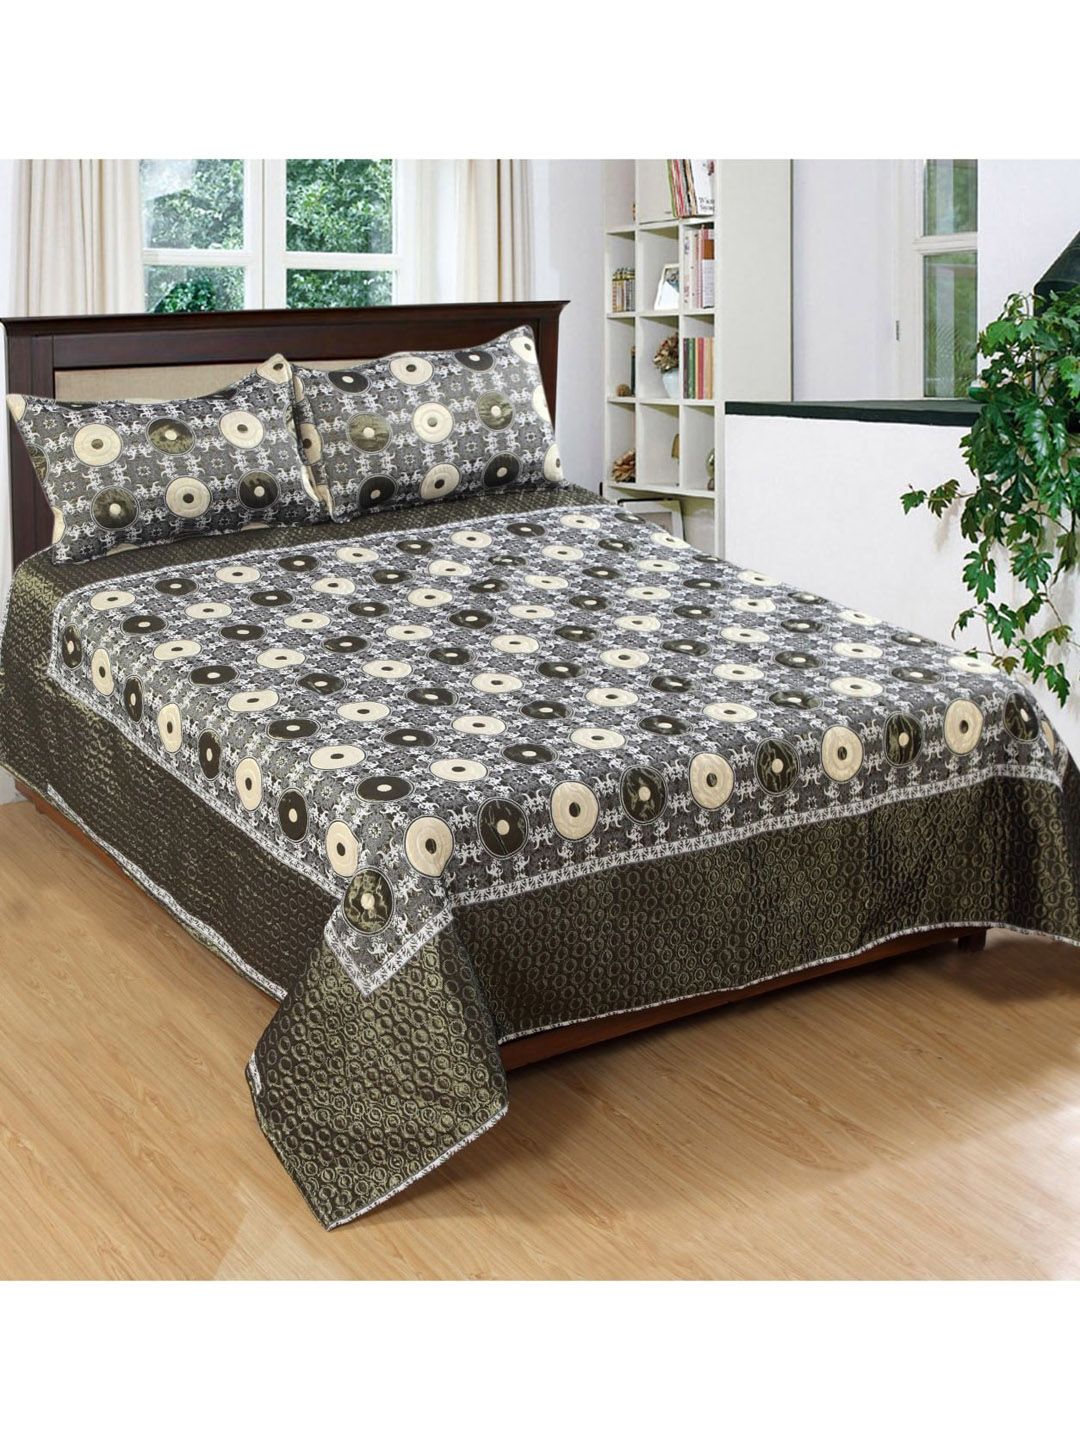 Varde Green & White Woven Design Double King Size Bedcover With 2 Pillow Cover Price in India